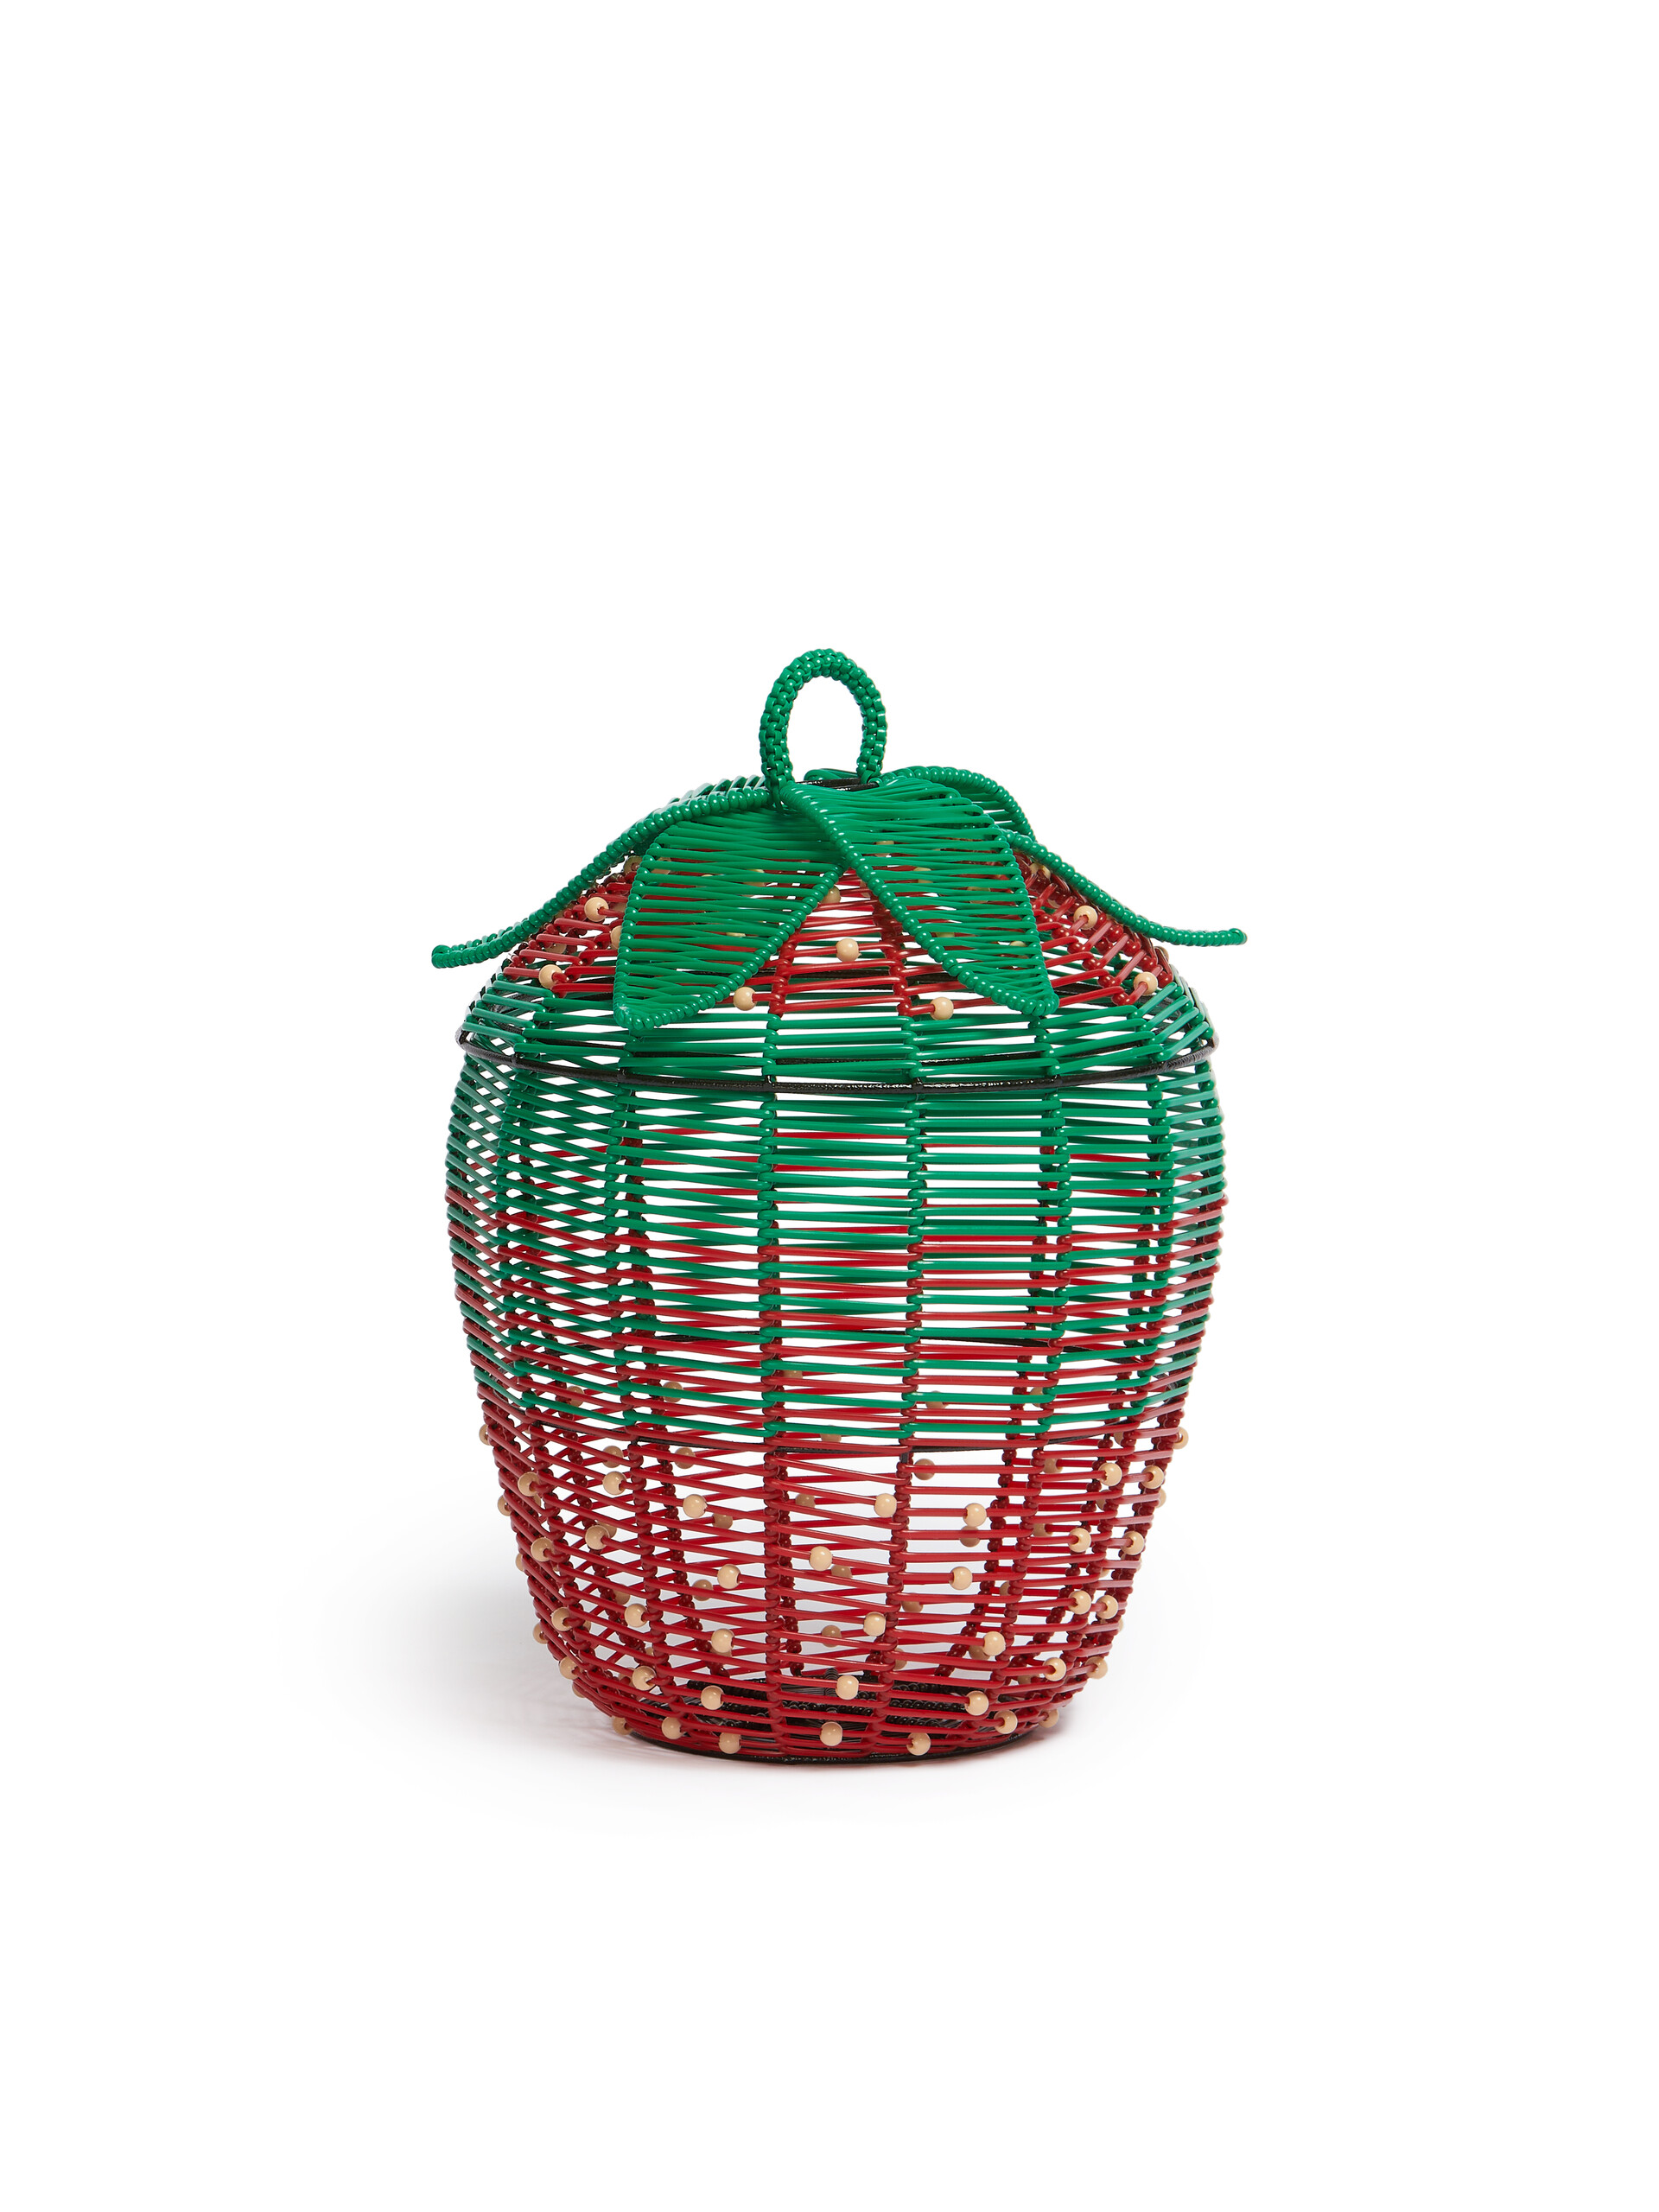 Red Marni Market Strawberry Basket - Accessories - Image 2